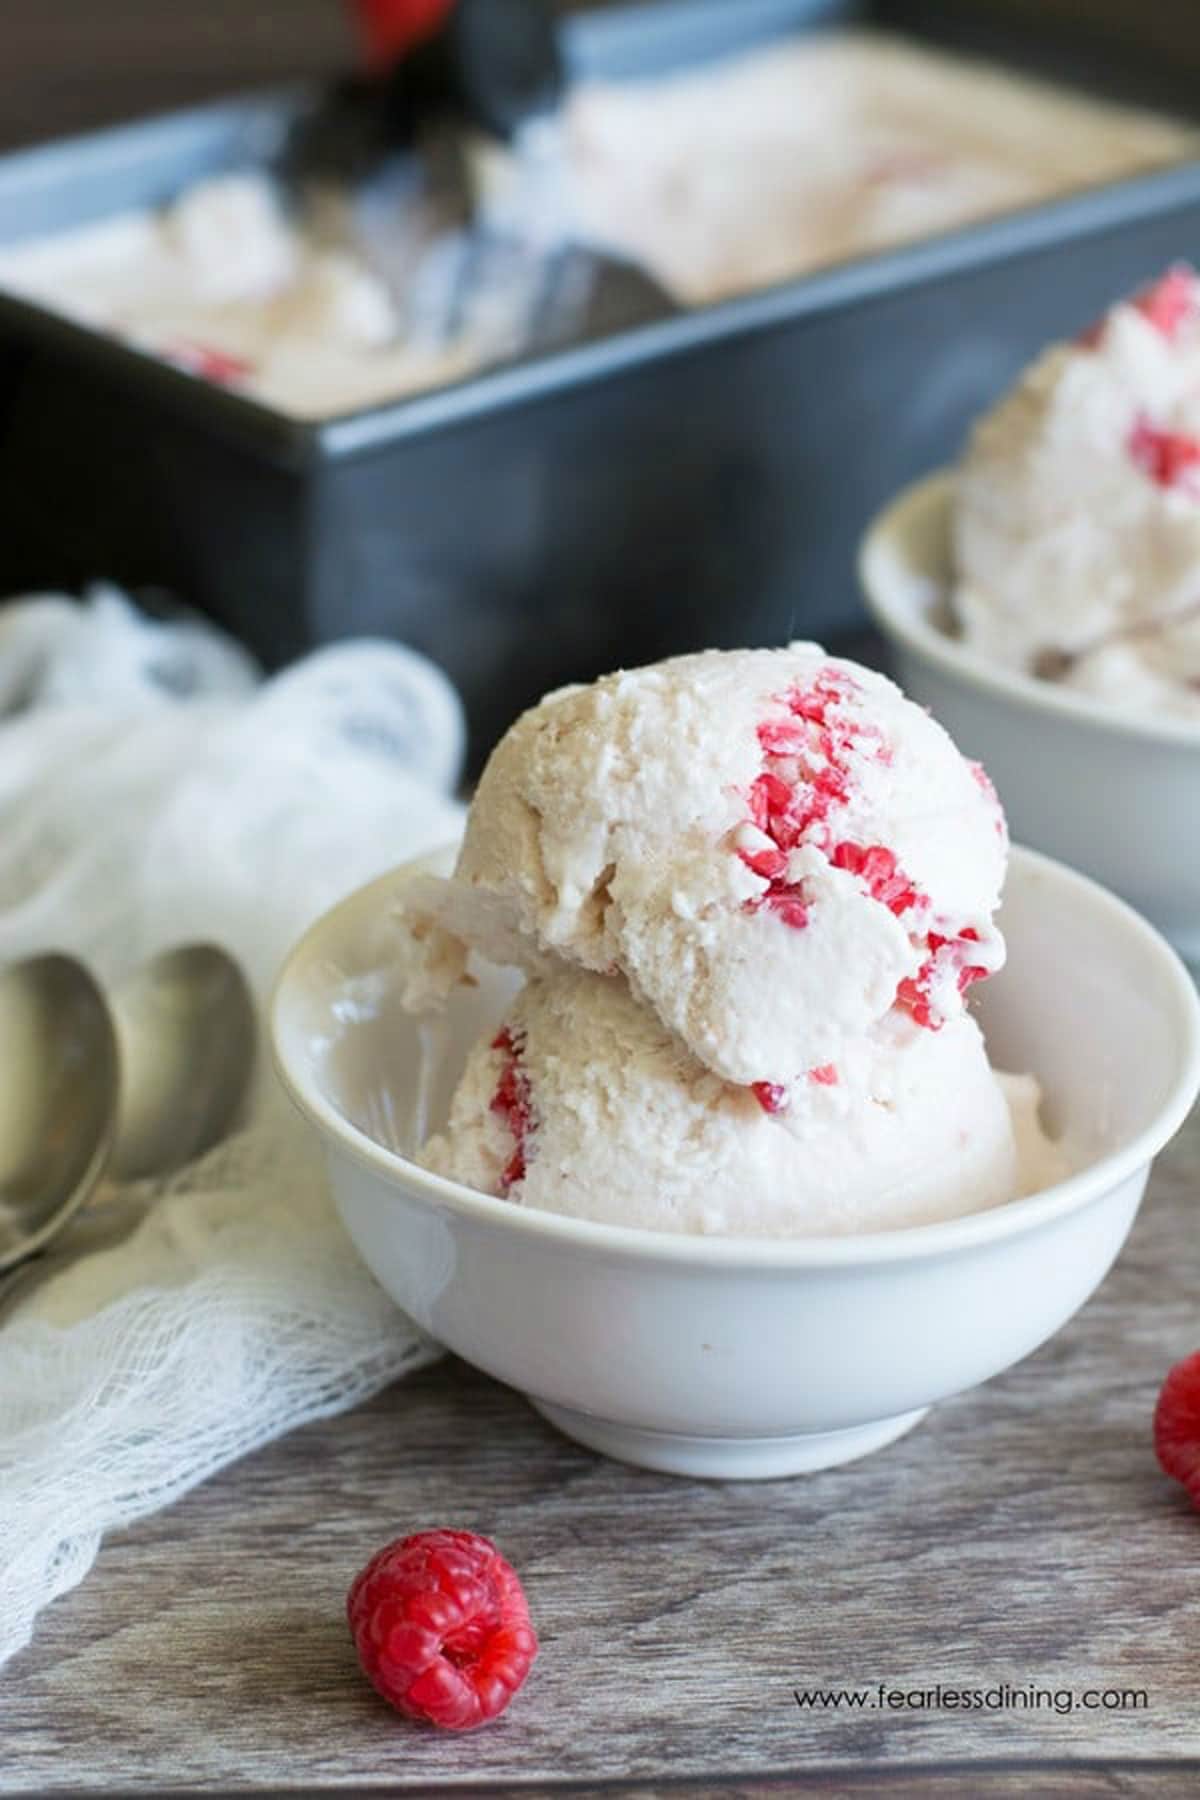 A scoop of white chocolate raspberry ice cream in a small white bowl.